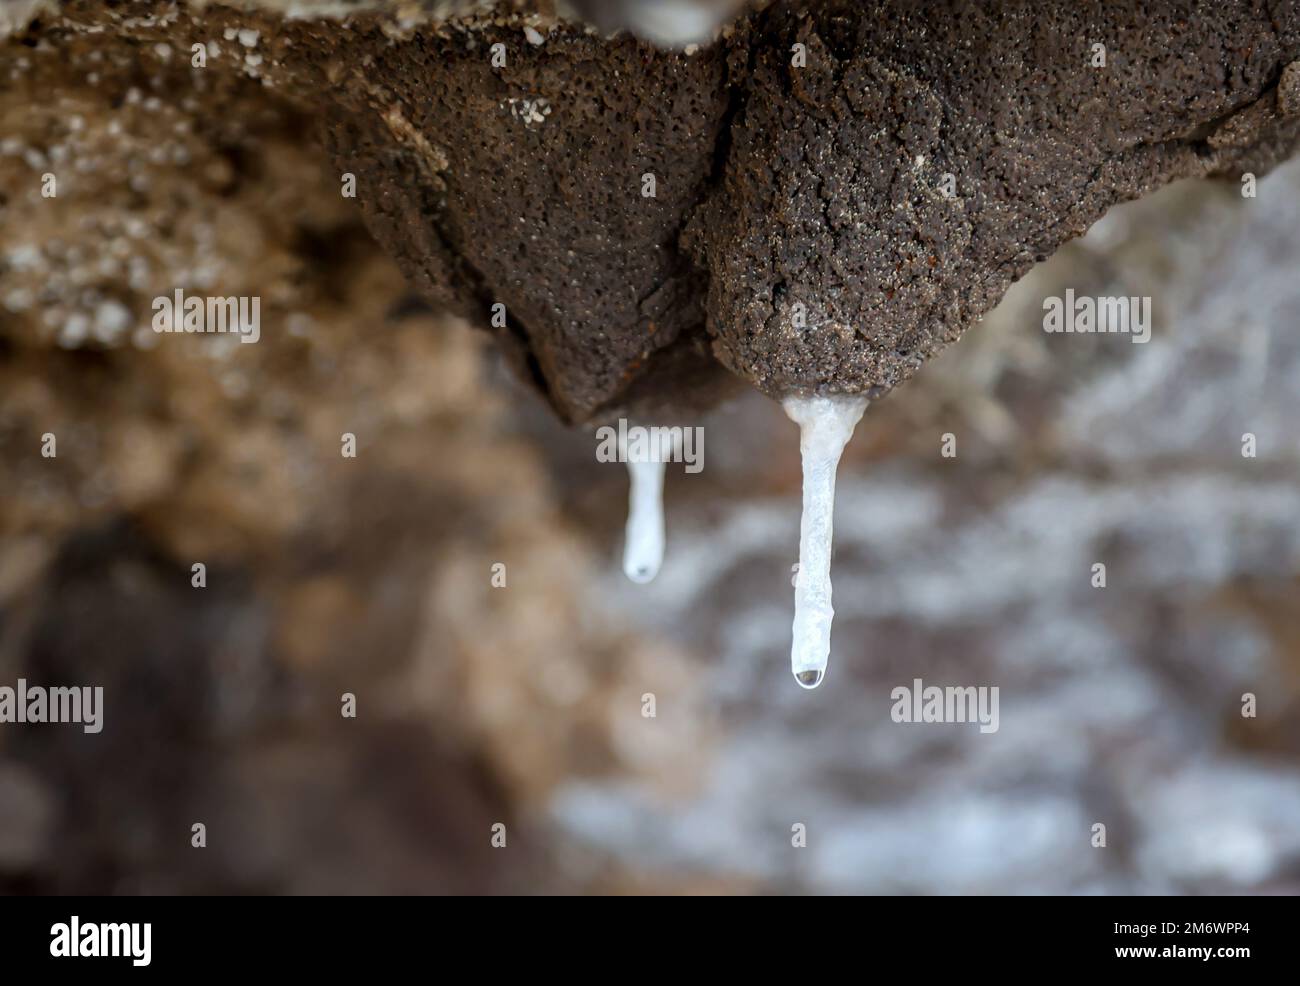 On a rocky outcrop on the coast, small stalactites are formed by mineral-rich water. Stock Photo